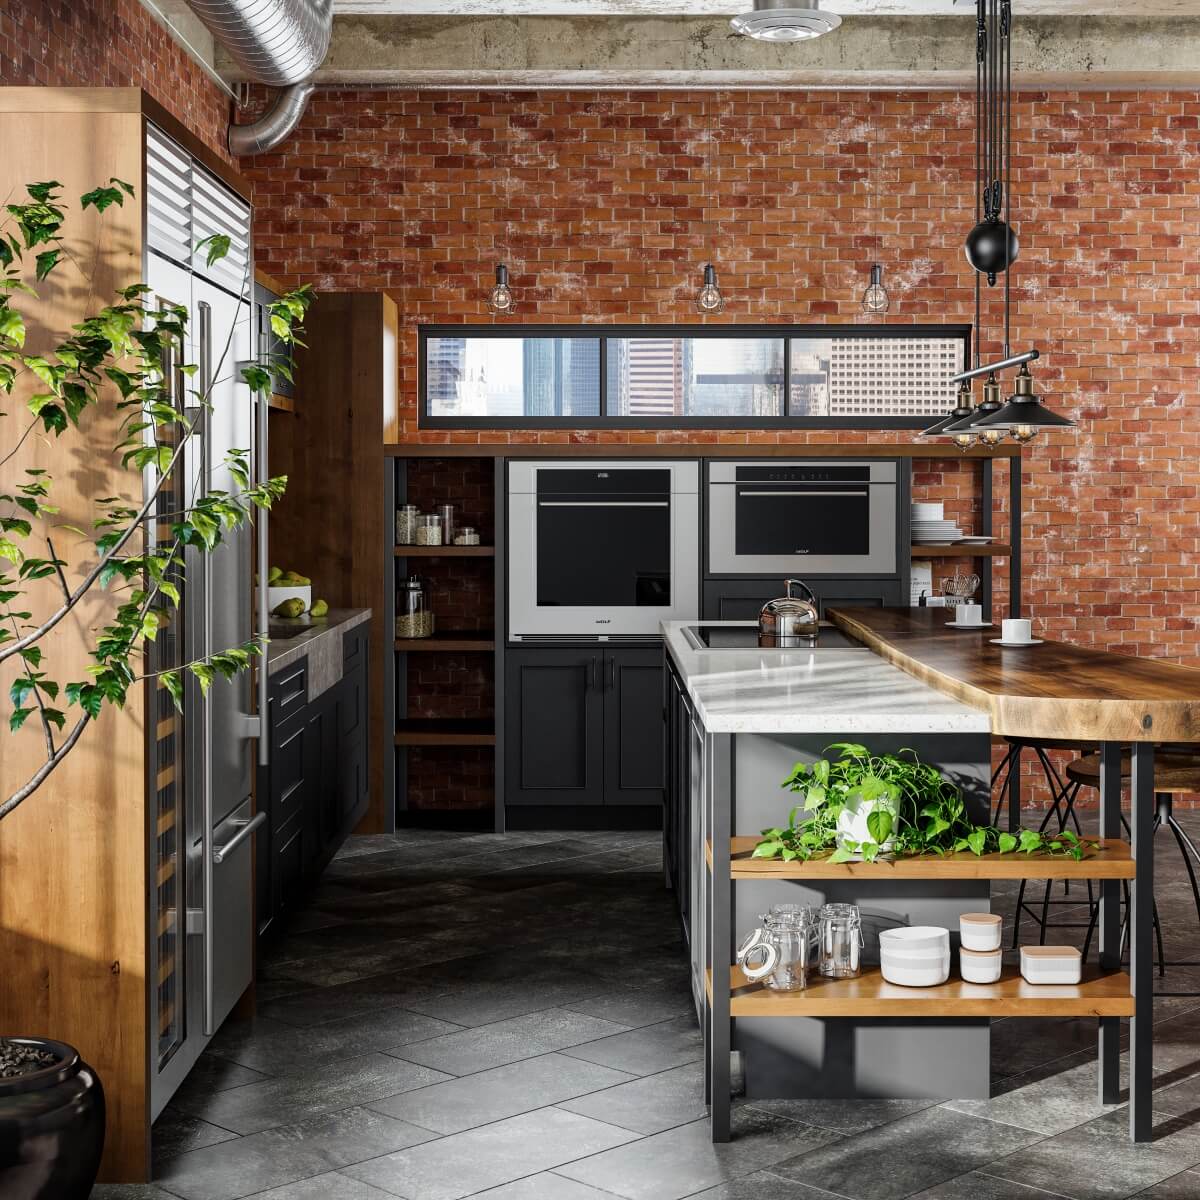 An Industrial style kitchen design in an urban loft with exposed brick walls and ductwork. The modern and rustic cabinets use a black painted finish and accents in a wood with a warm stain. Open shelves and black metal fixtures add to the style.